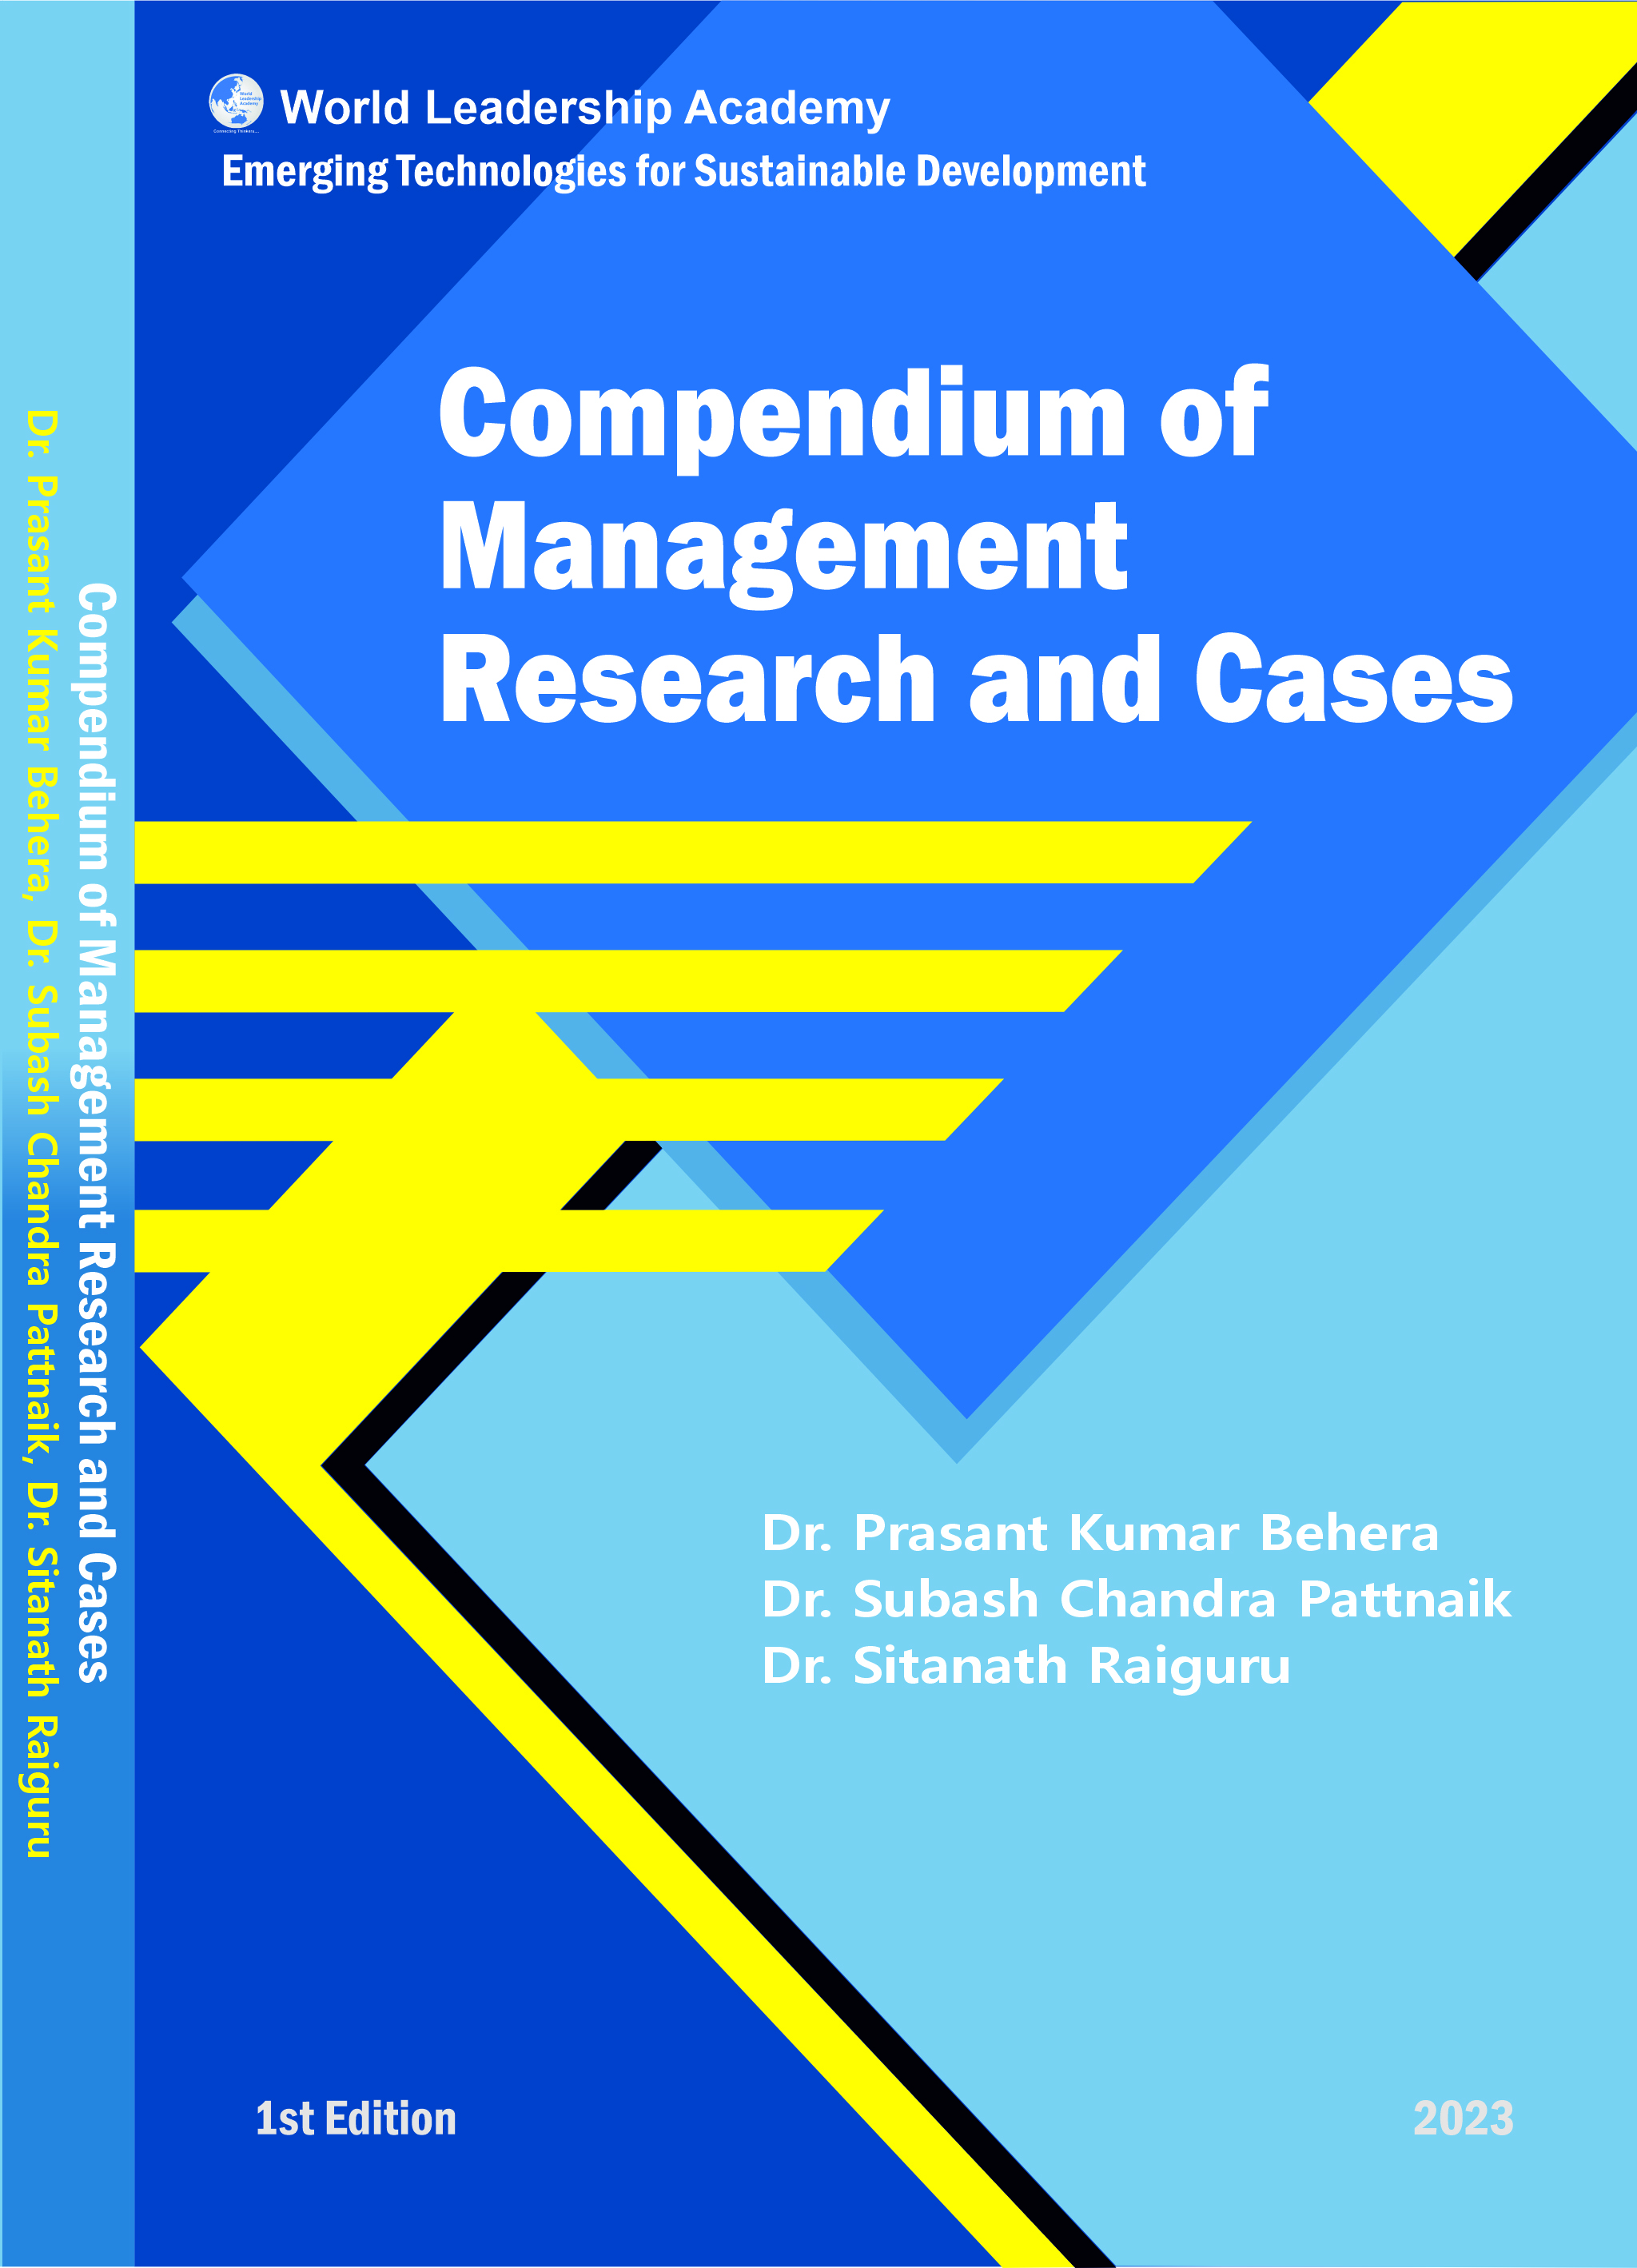 Compendium of Management Research and Cases